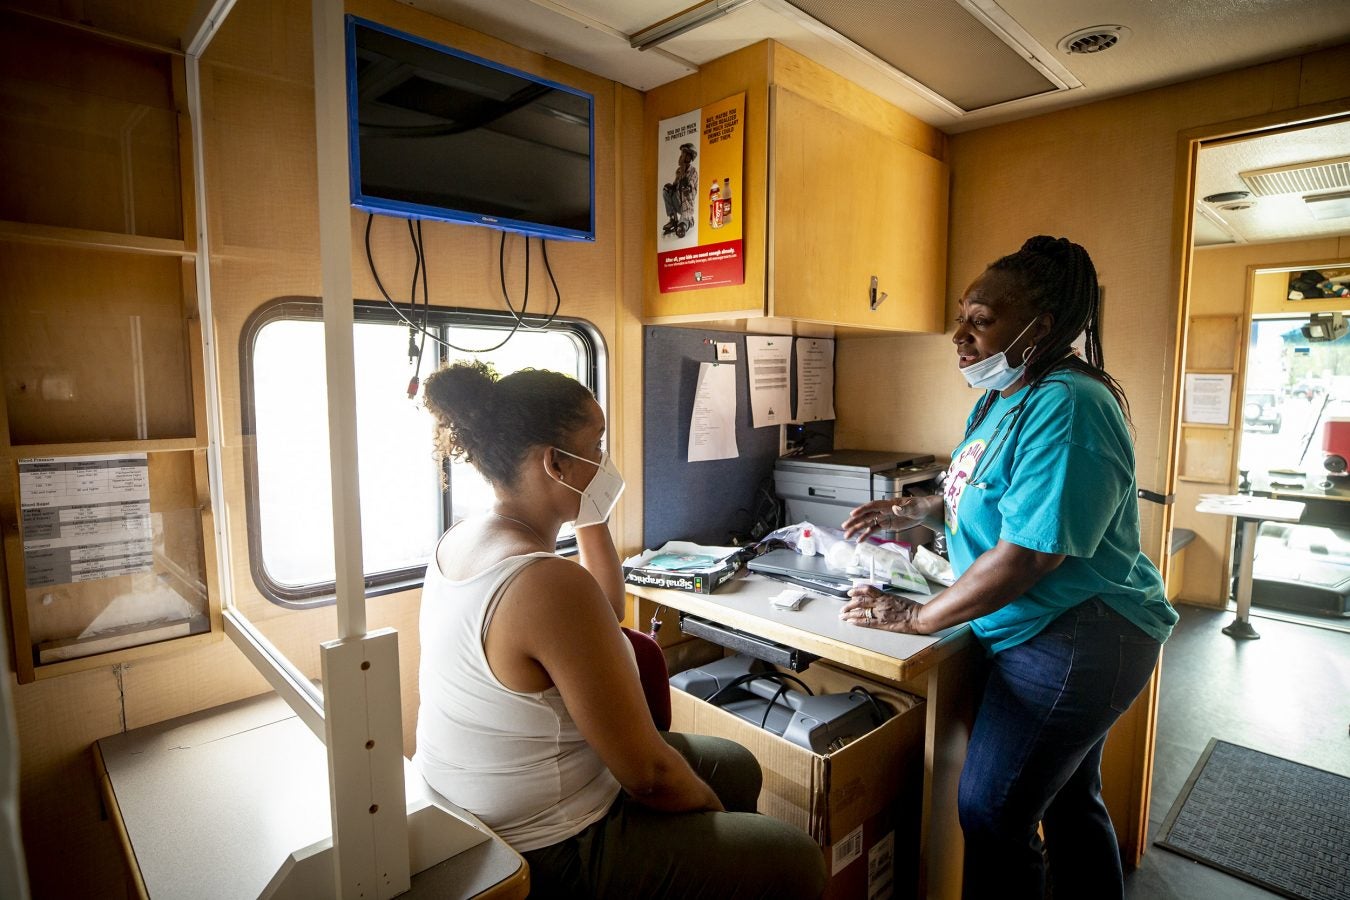 Rainelle Walker White, right, assistant director, while eating her lunch, chats with staffer Joanne Suarez inside Harvard University's Family Van.